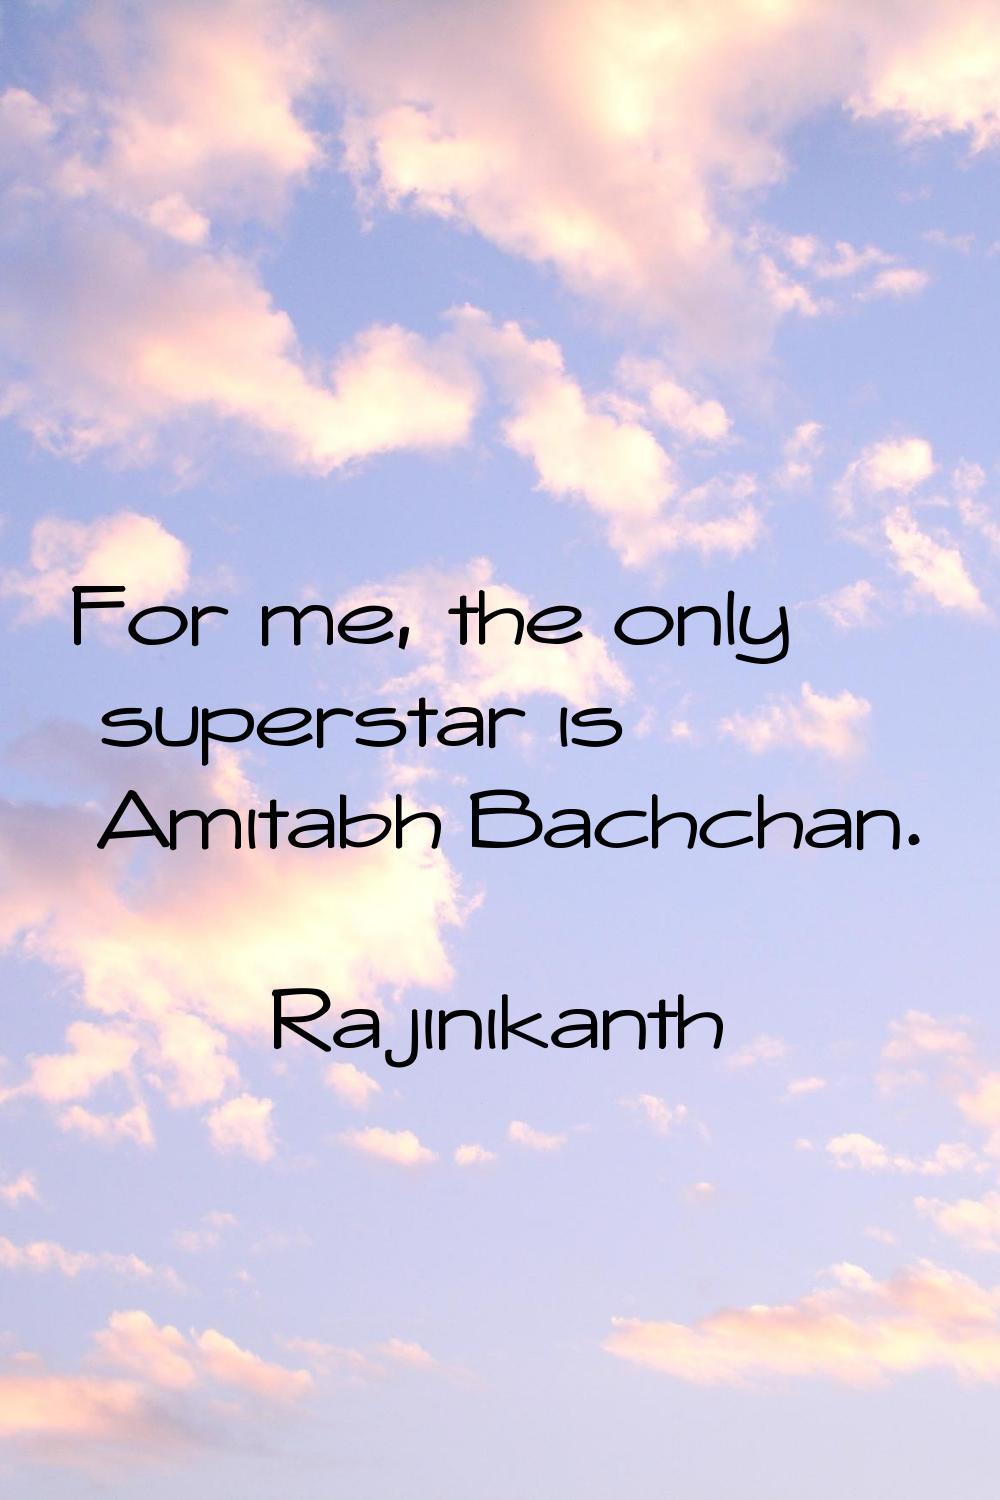 For me, the only superstar is Amitabh Bachchan.